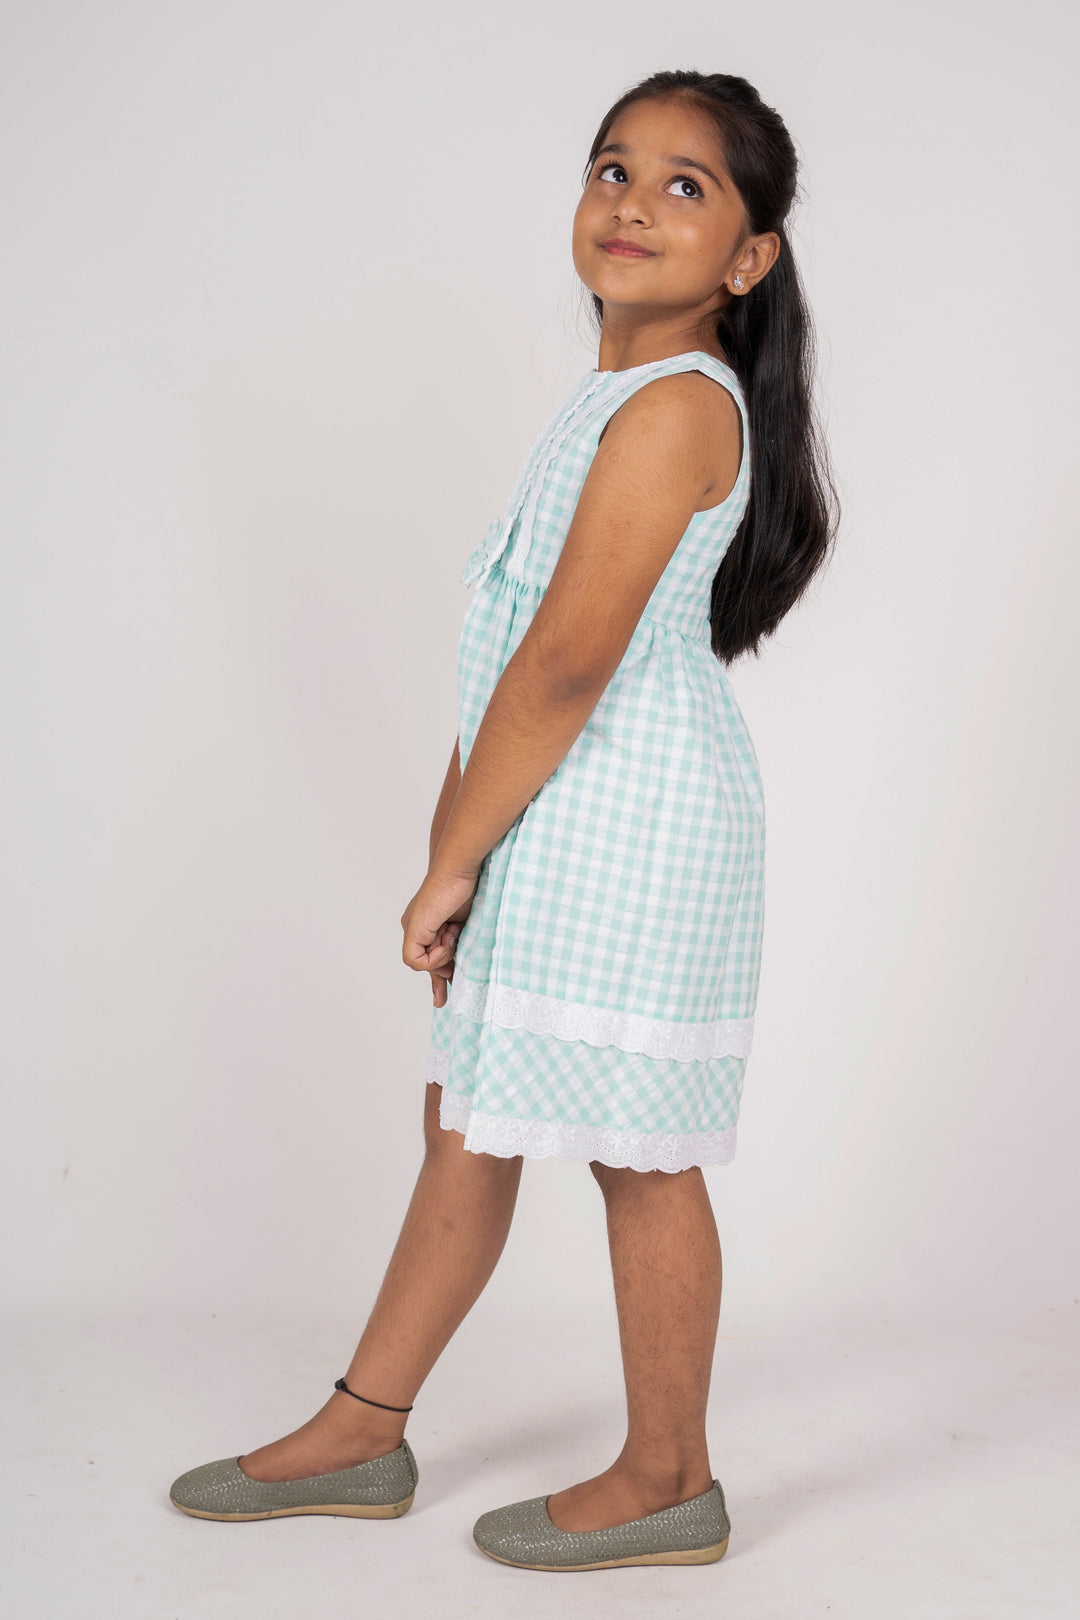 The Nesavu Frocks & Dresses White Checked Cotton Gown With Lace Trims And Bow For Girls psr silks Nesavu